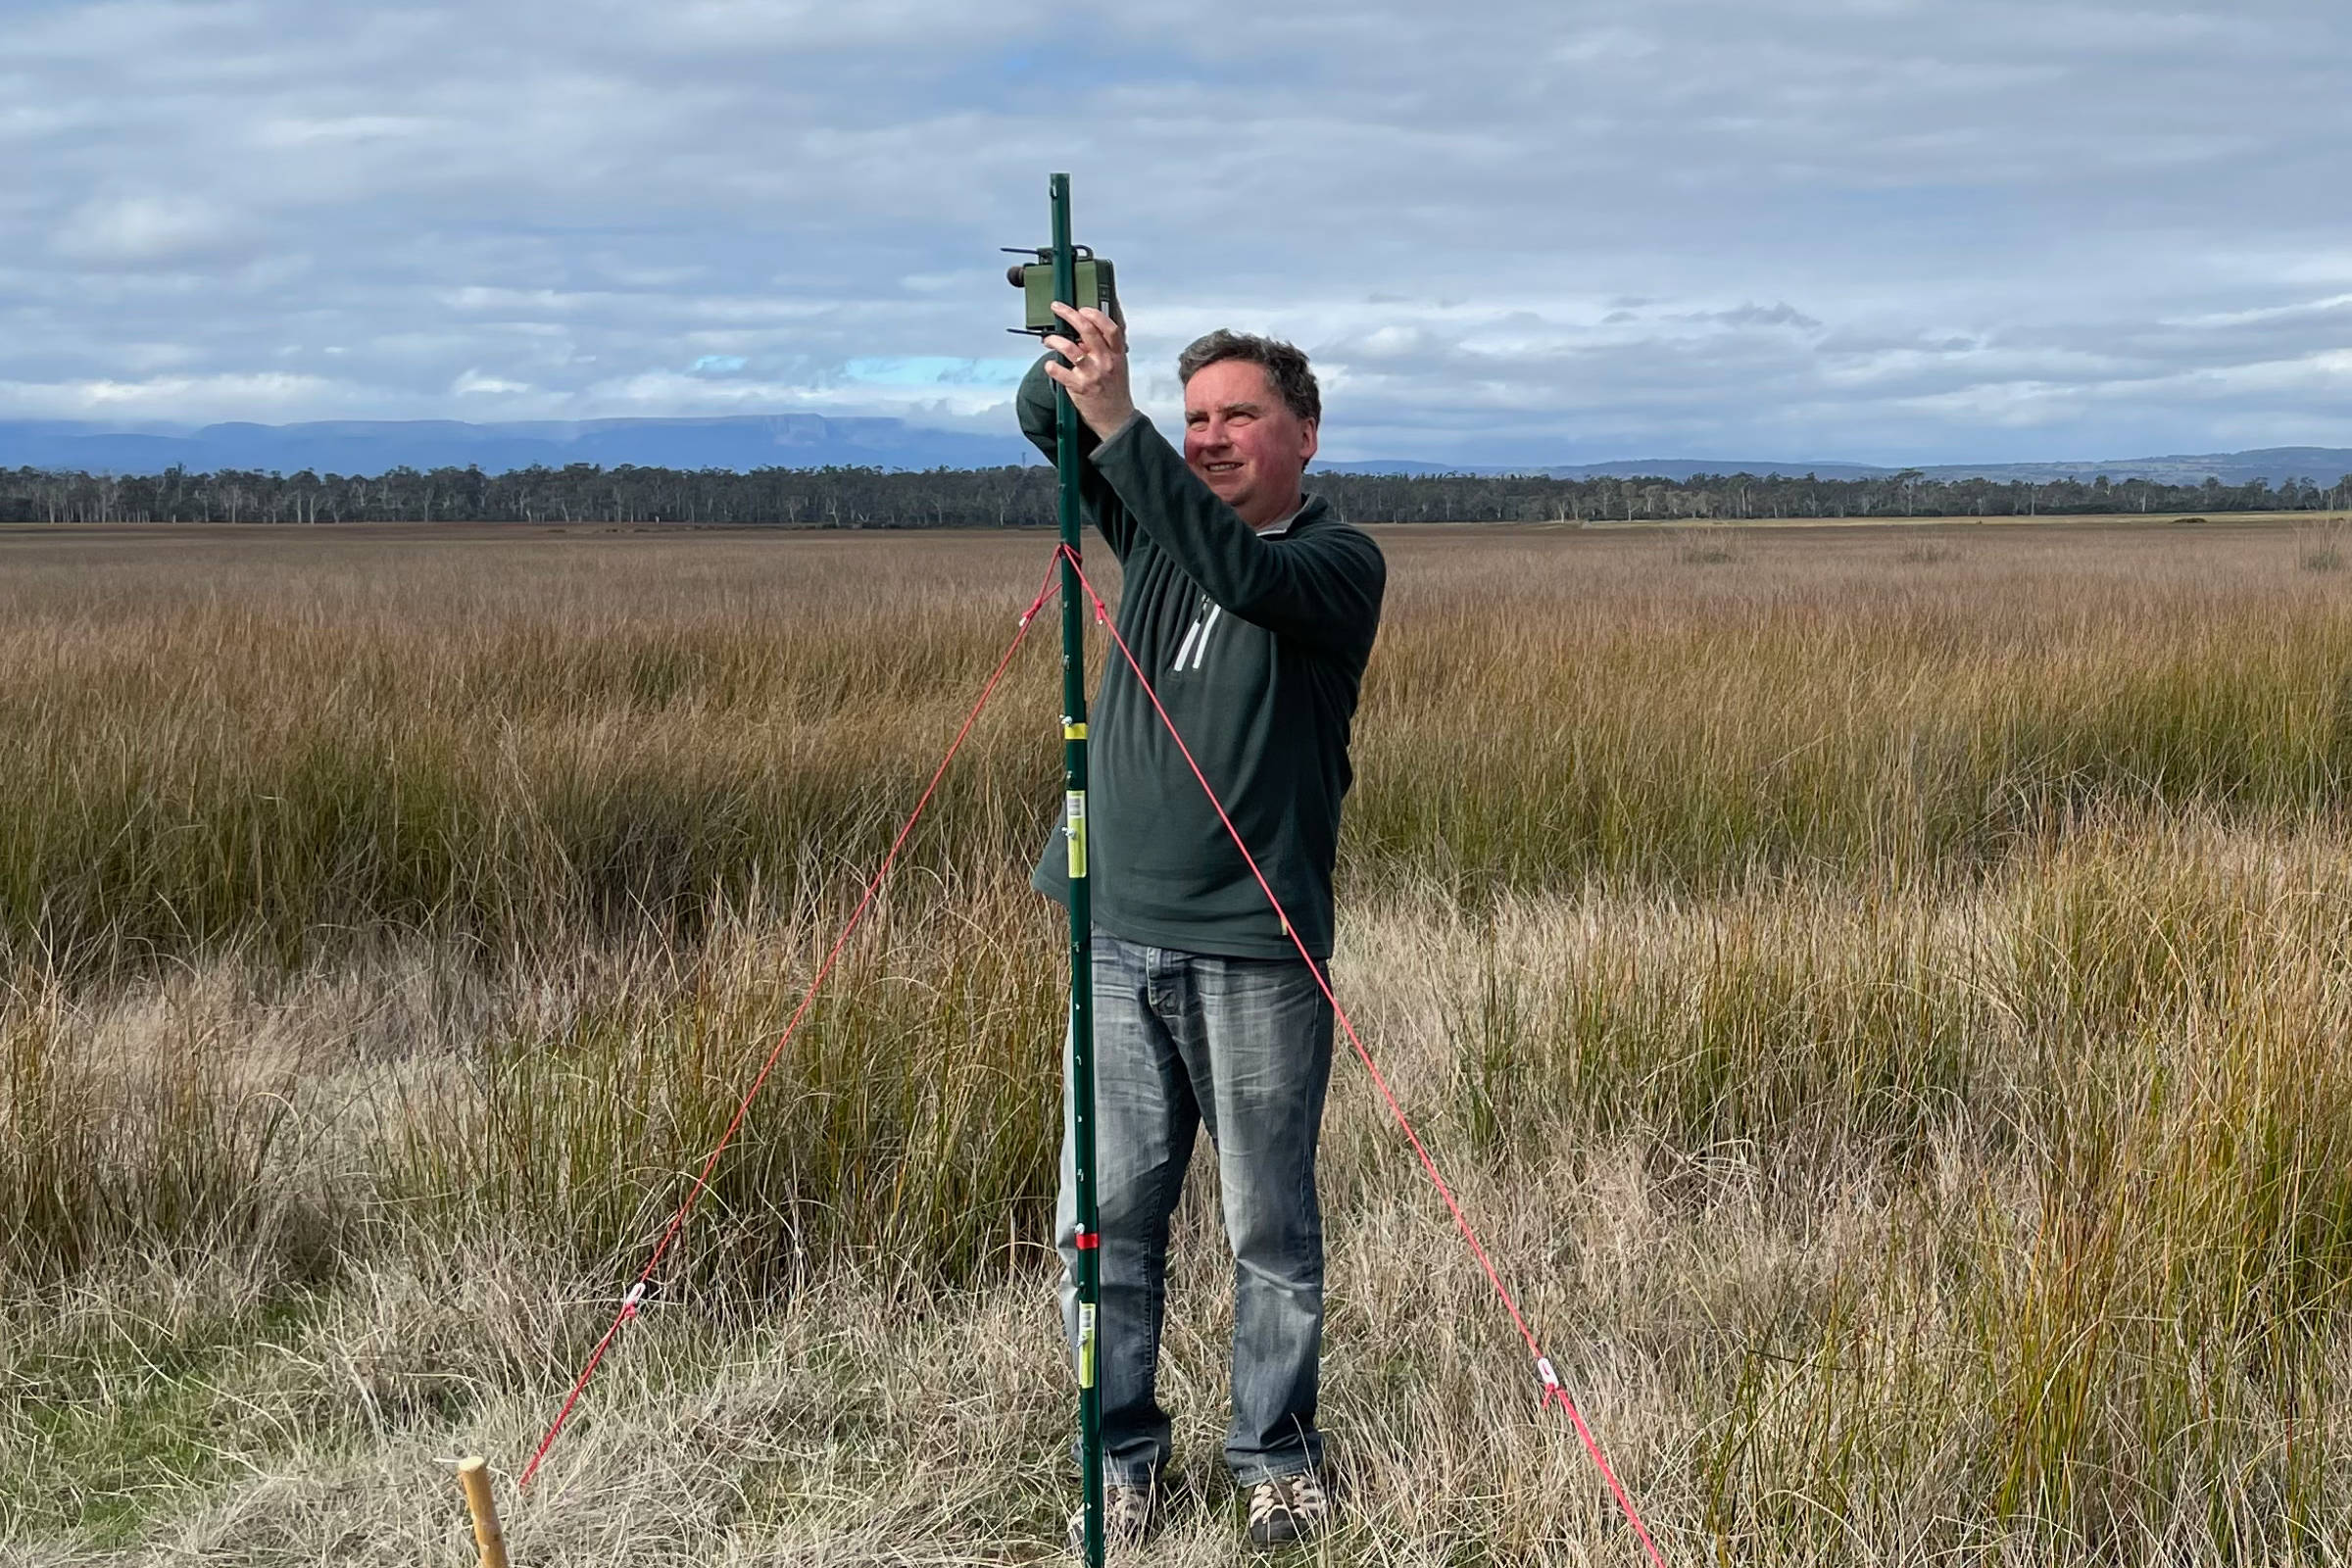 CallTrackers coordinator Dr Jim Lovell setting up a small, dark green acoustic recorder on a lightweight pole, stabilised by cords, in front of a big, open wetland area thick with reeds (promising habitat for the Australasian bittern). Photo: Clare Hawkins.